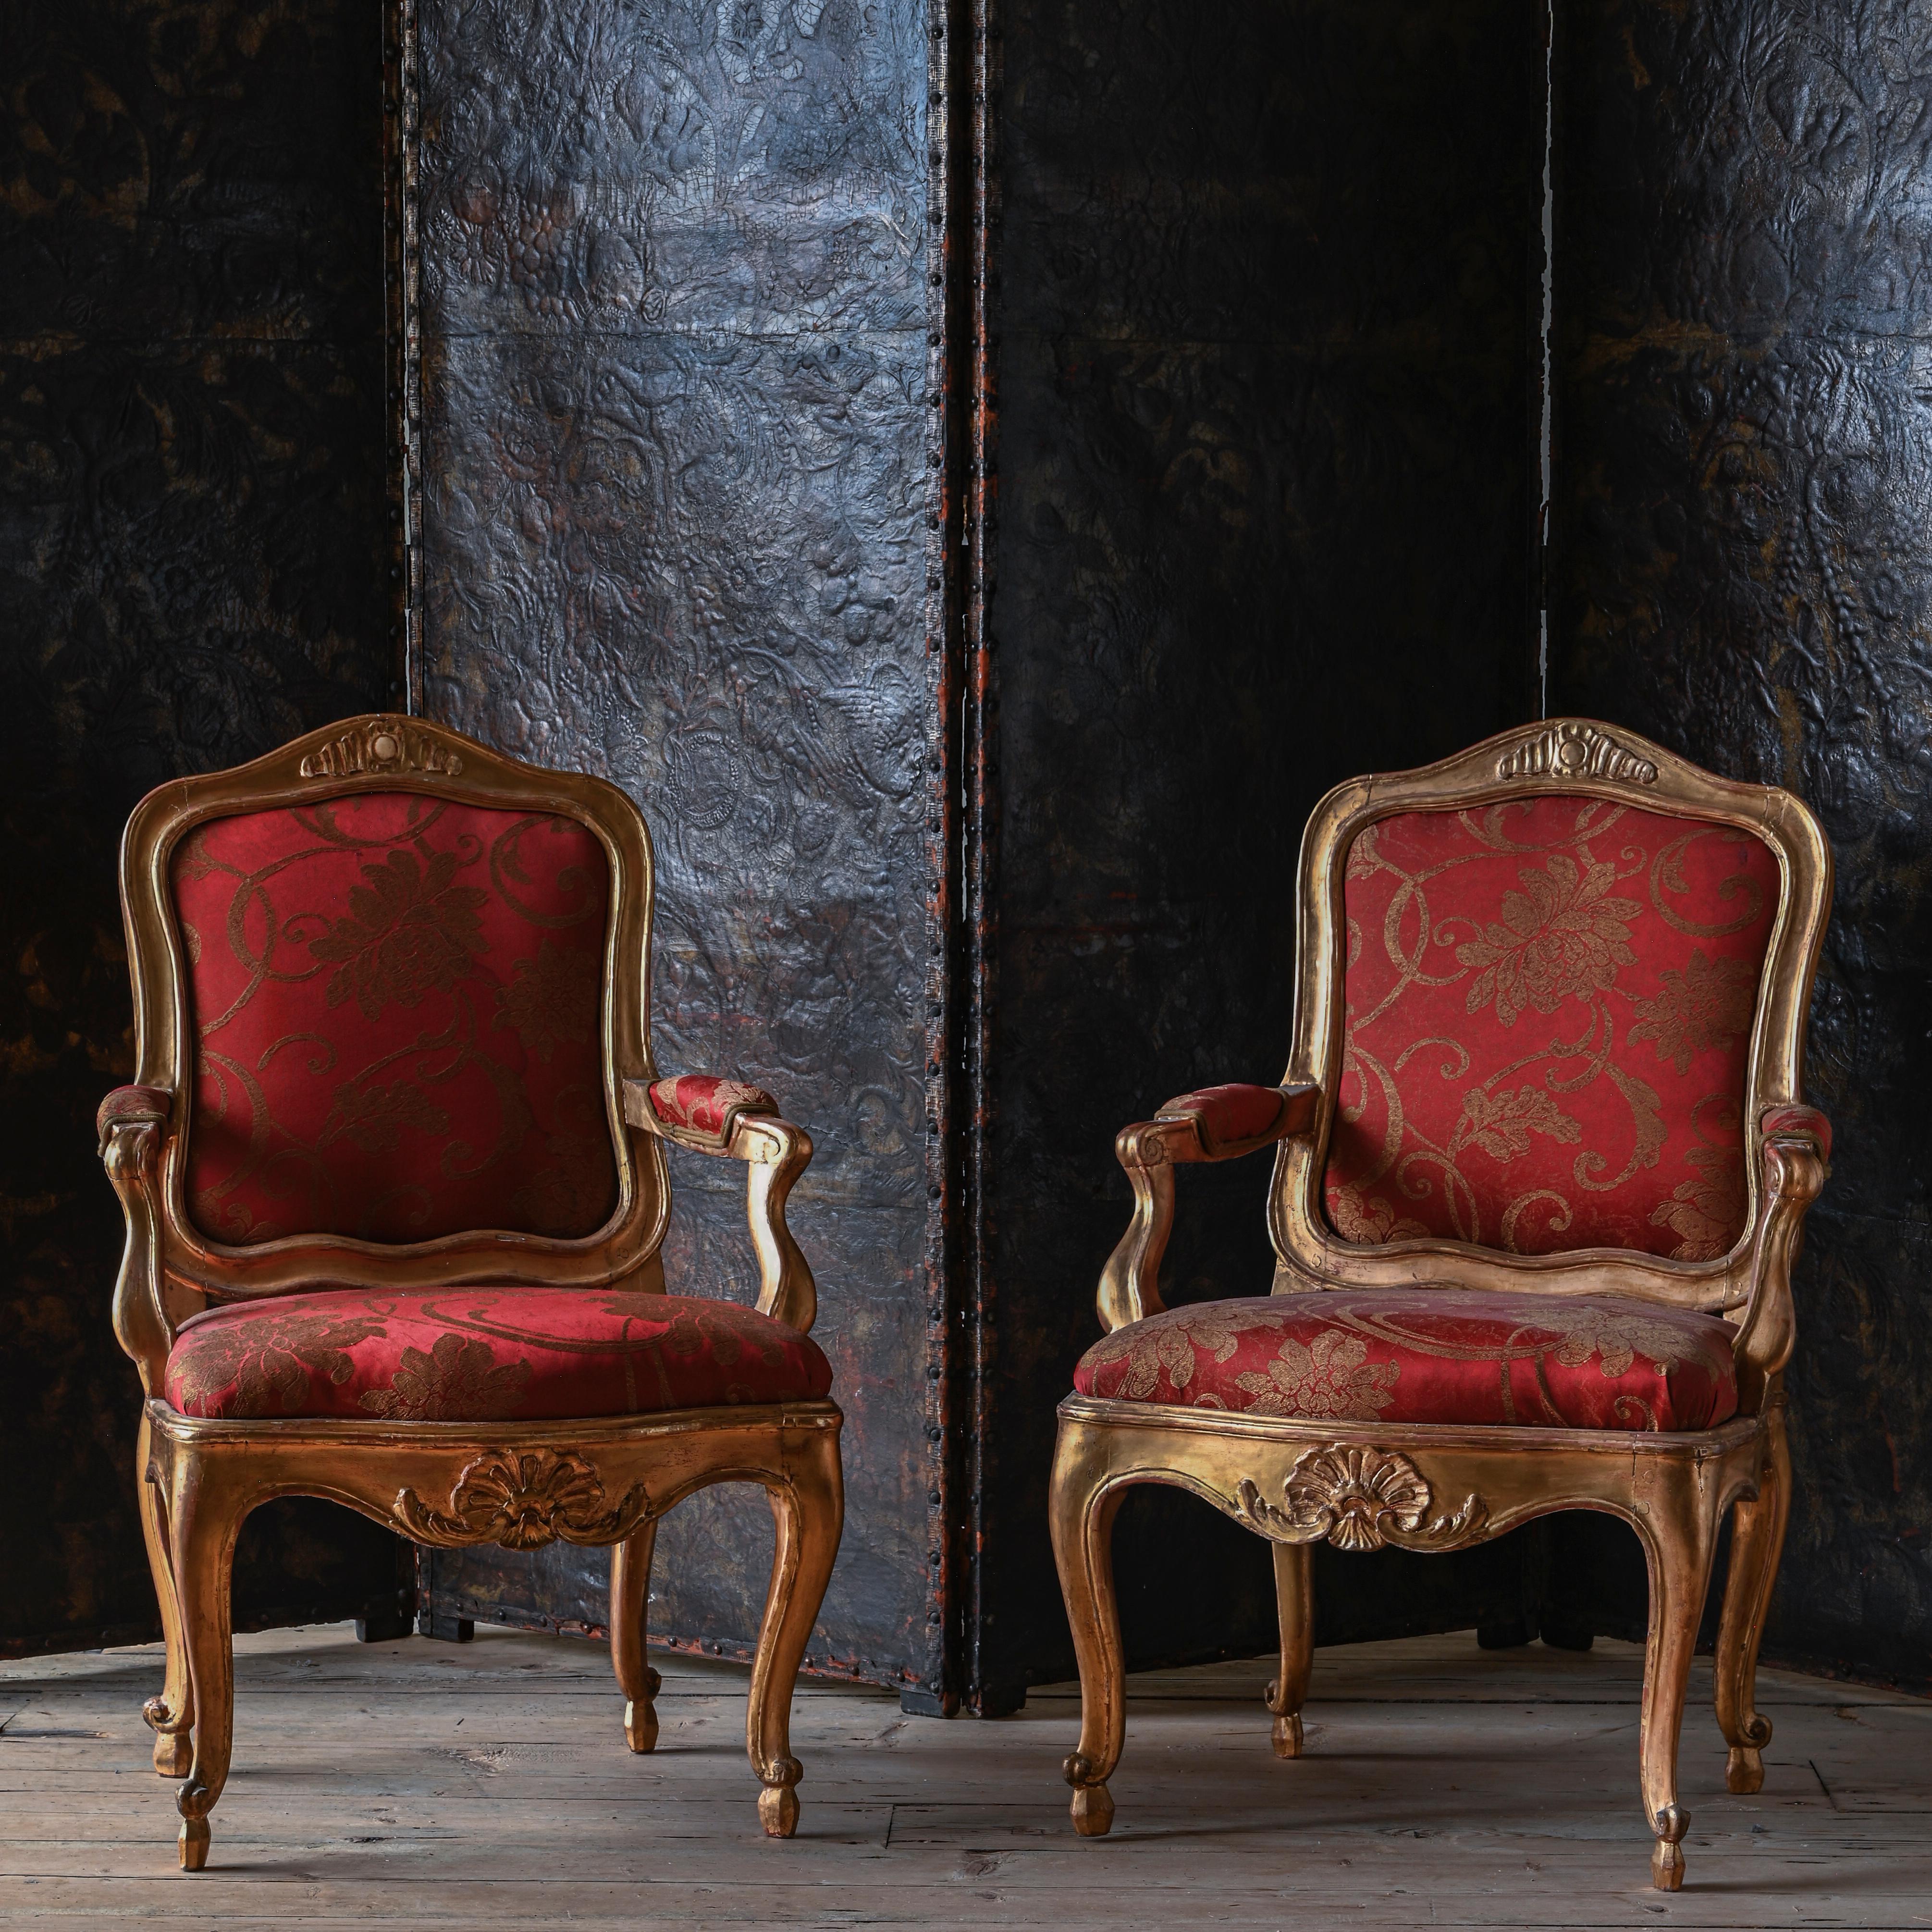 Fine pair of 18th century Rococo giltwood armchairs. Stockholm, Sweden, circa 1770. Similar exceptional chairs can be found at the royal palace in Stockholm.